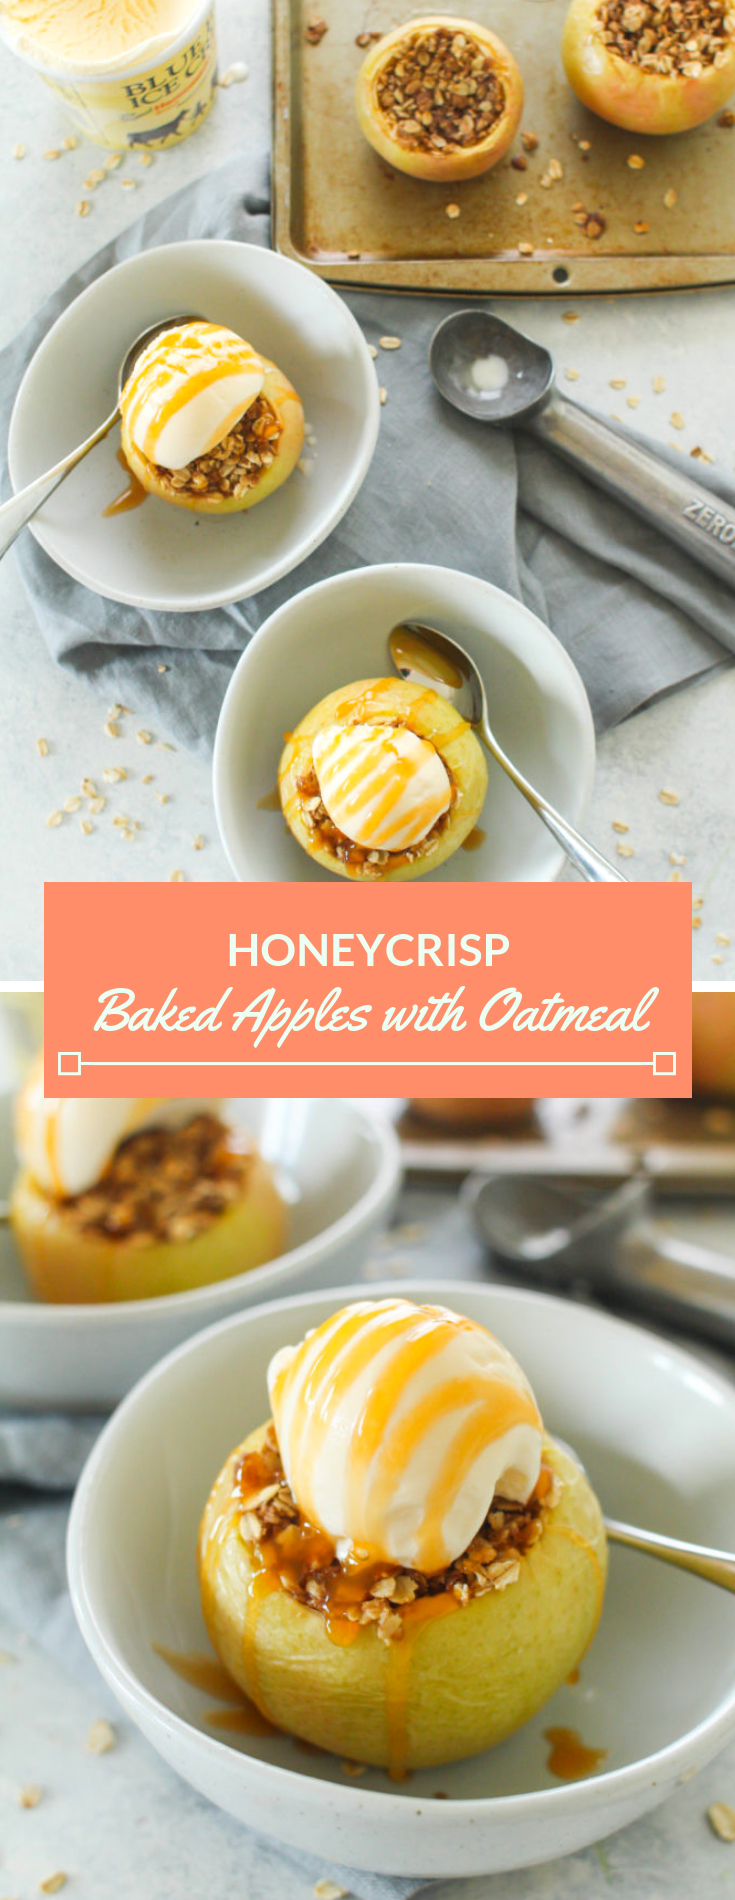 Sweet and juicy honeycrisp apples are baked until soft, stuffed with a crunchy brown sugar, cinnamon and oatmeal filling. These baked apples are a perfect Fall dessert topped with vanilla ice cream and a caramel drizzle. 